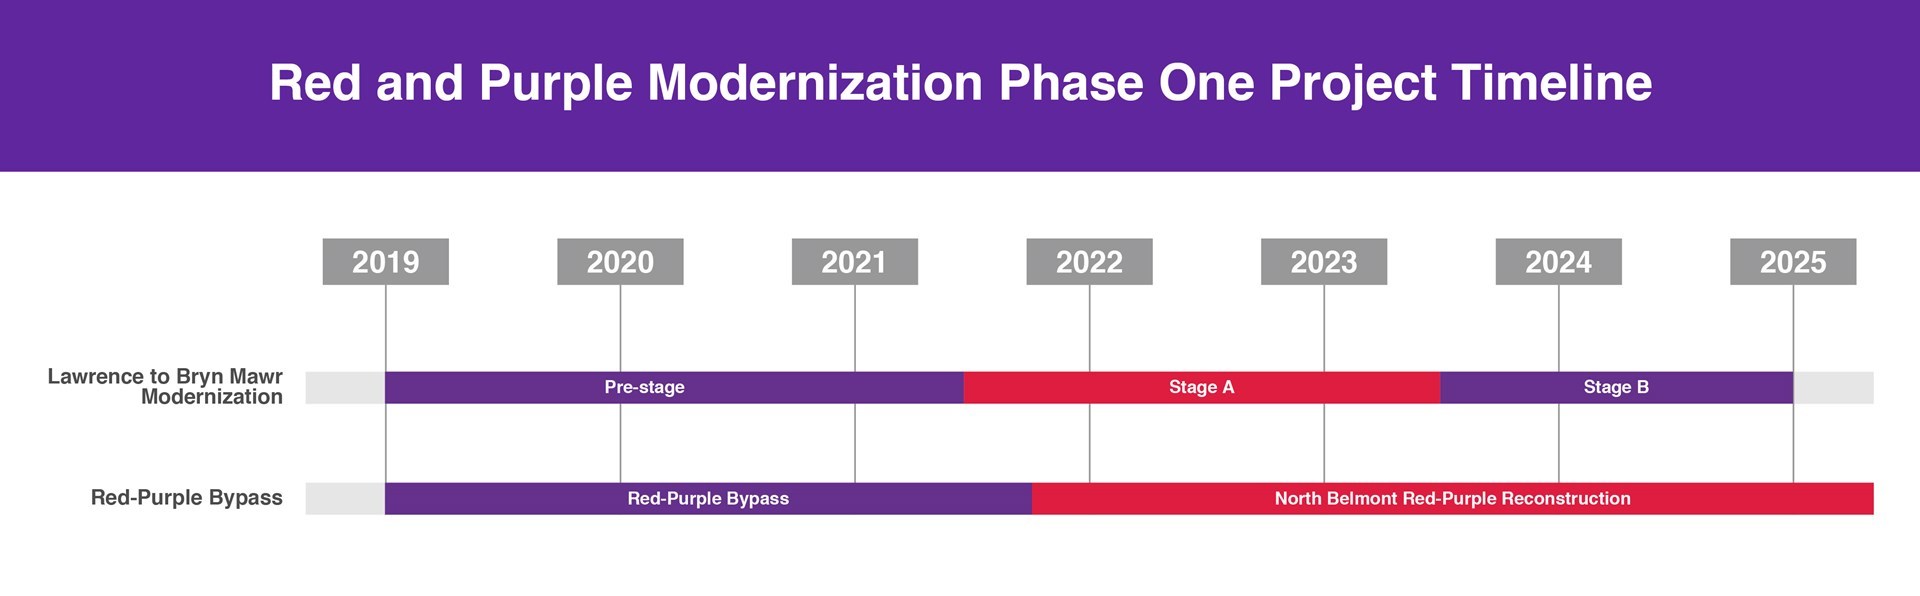 Timeline. Pre-stage, 2019-2021. Stage A, 2021-2023. Stage B, 2022-2024.